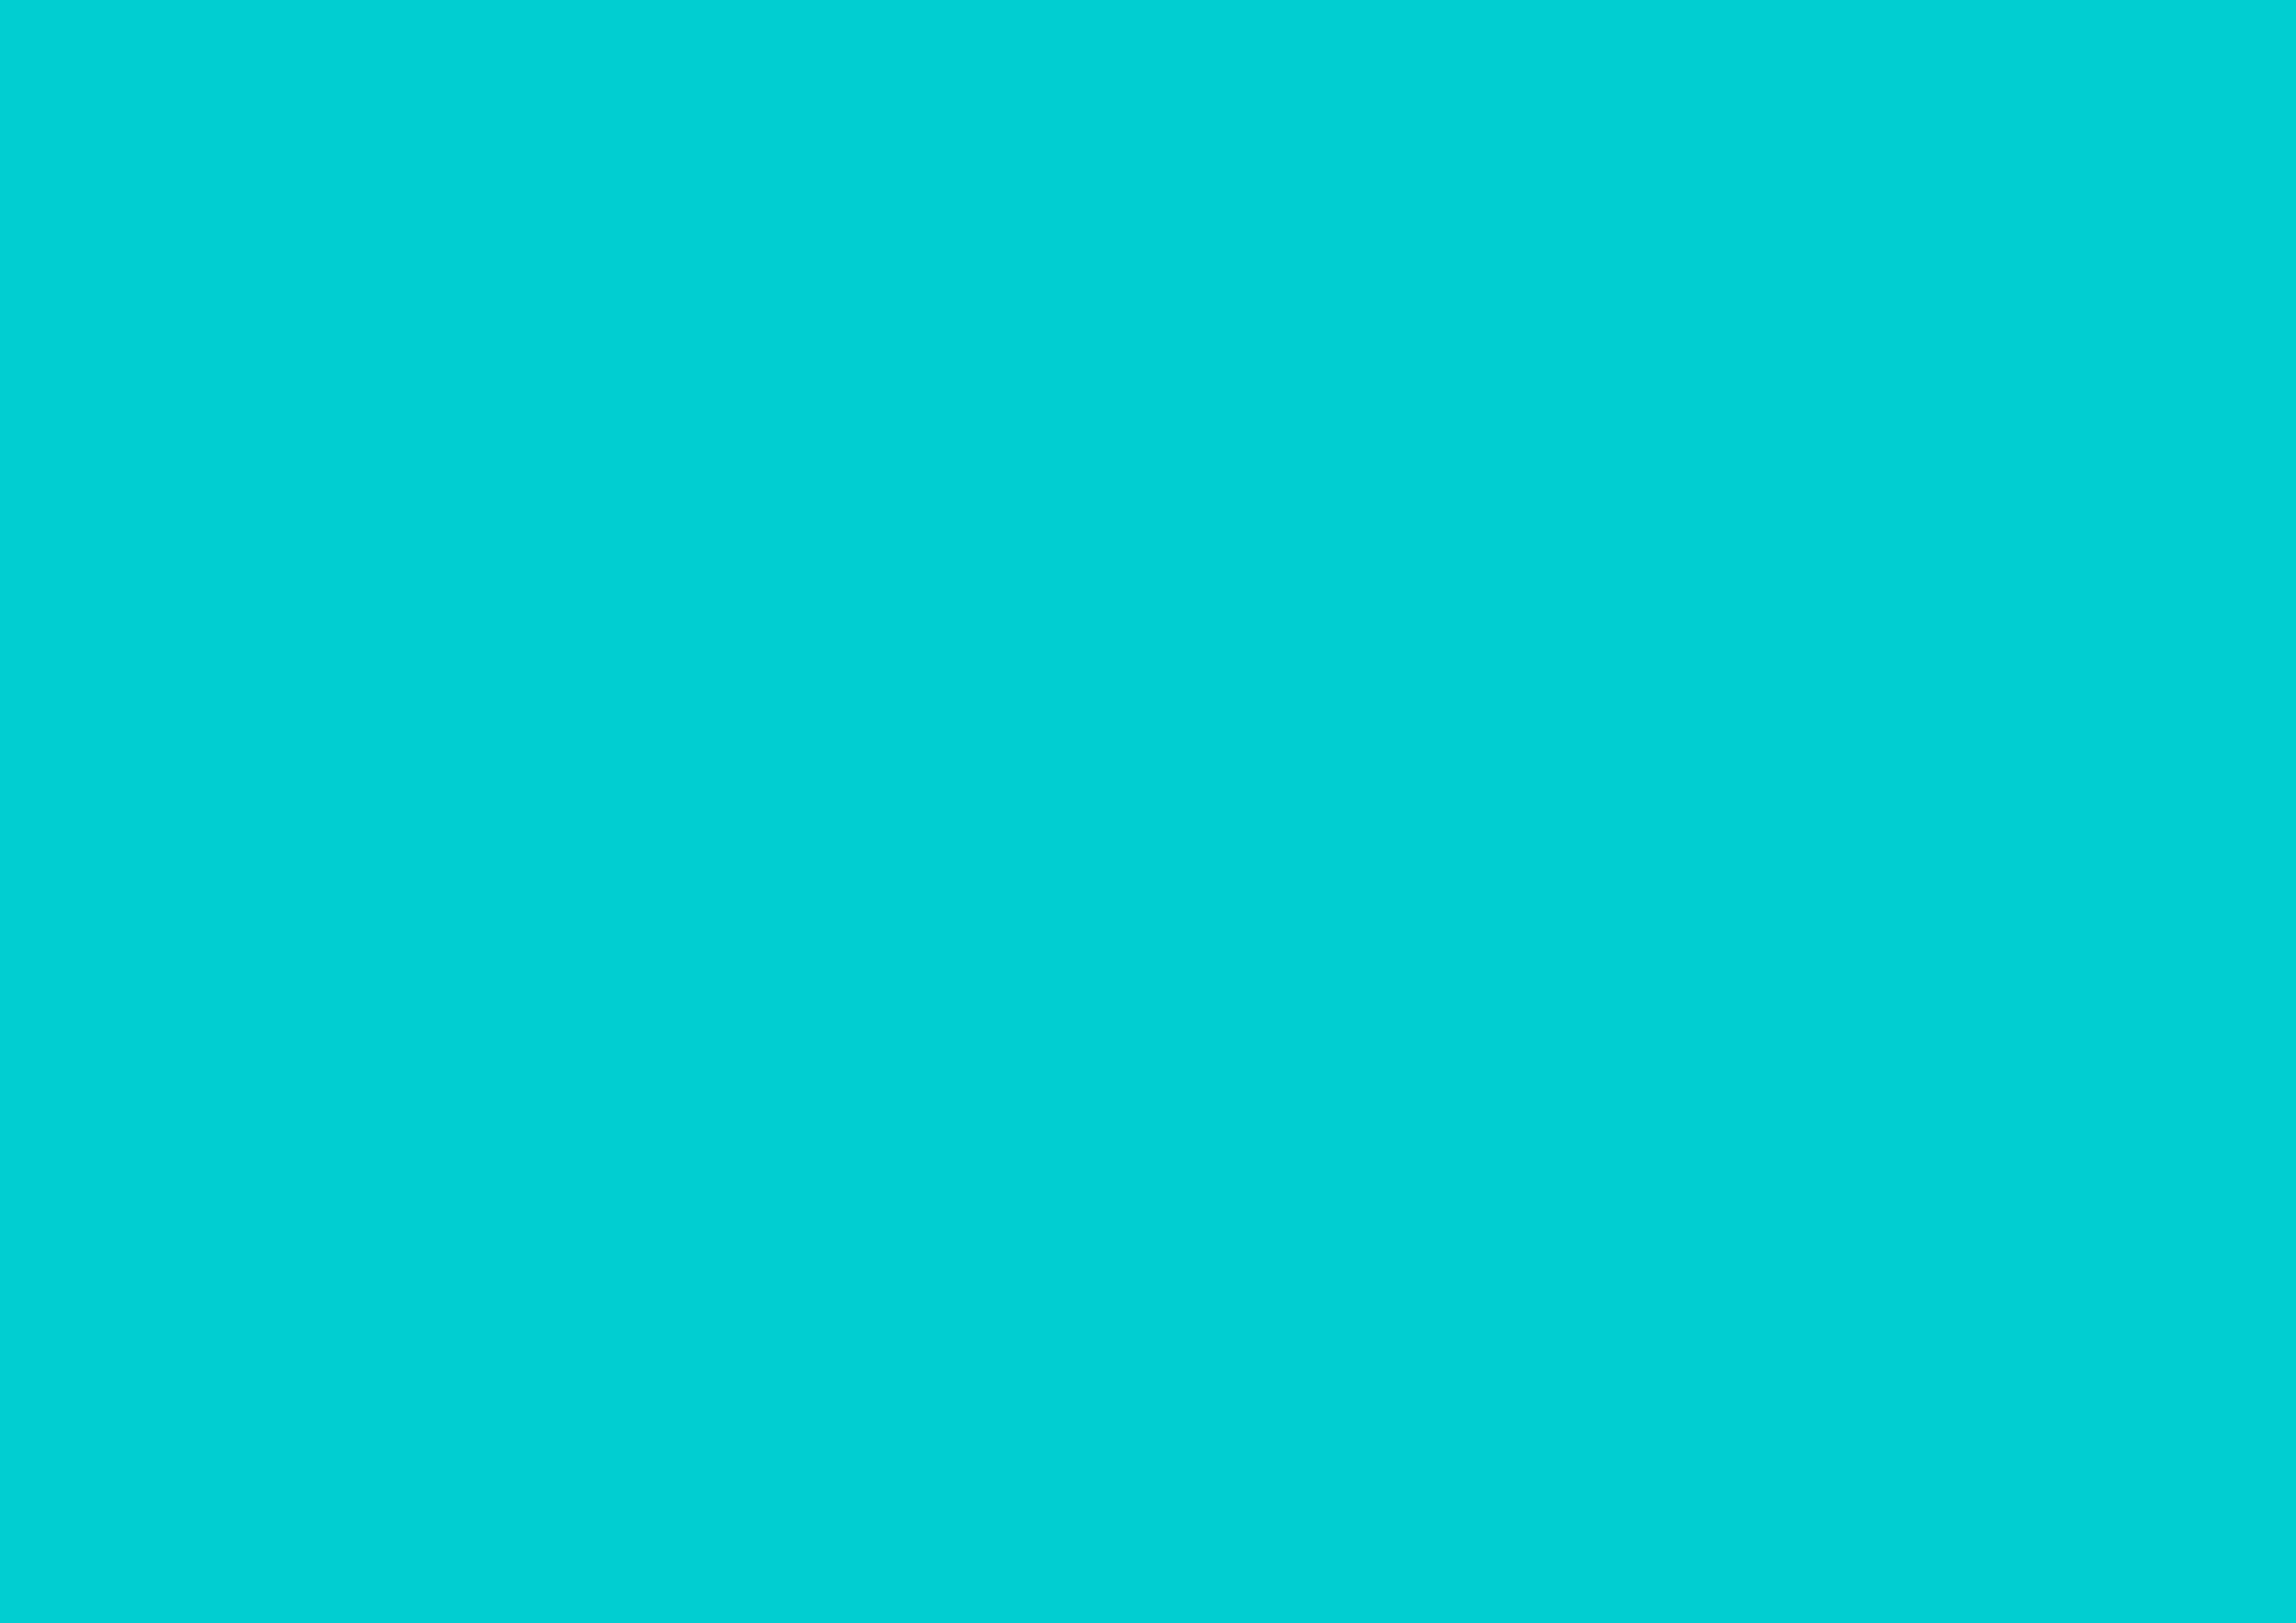 3508x2480 Dark Turquoise Solid Color Background